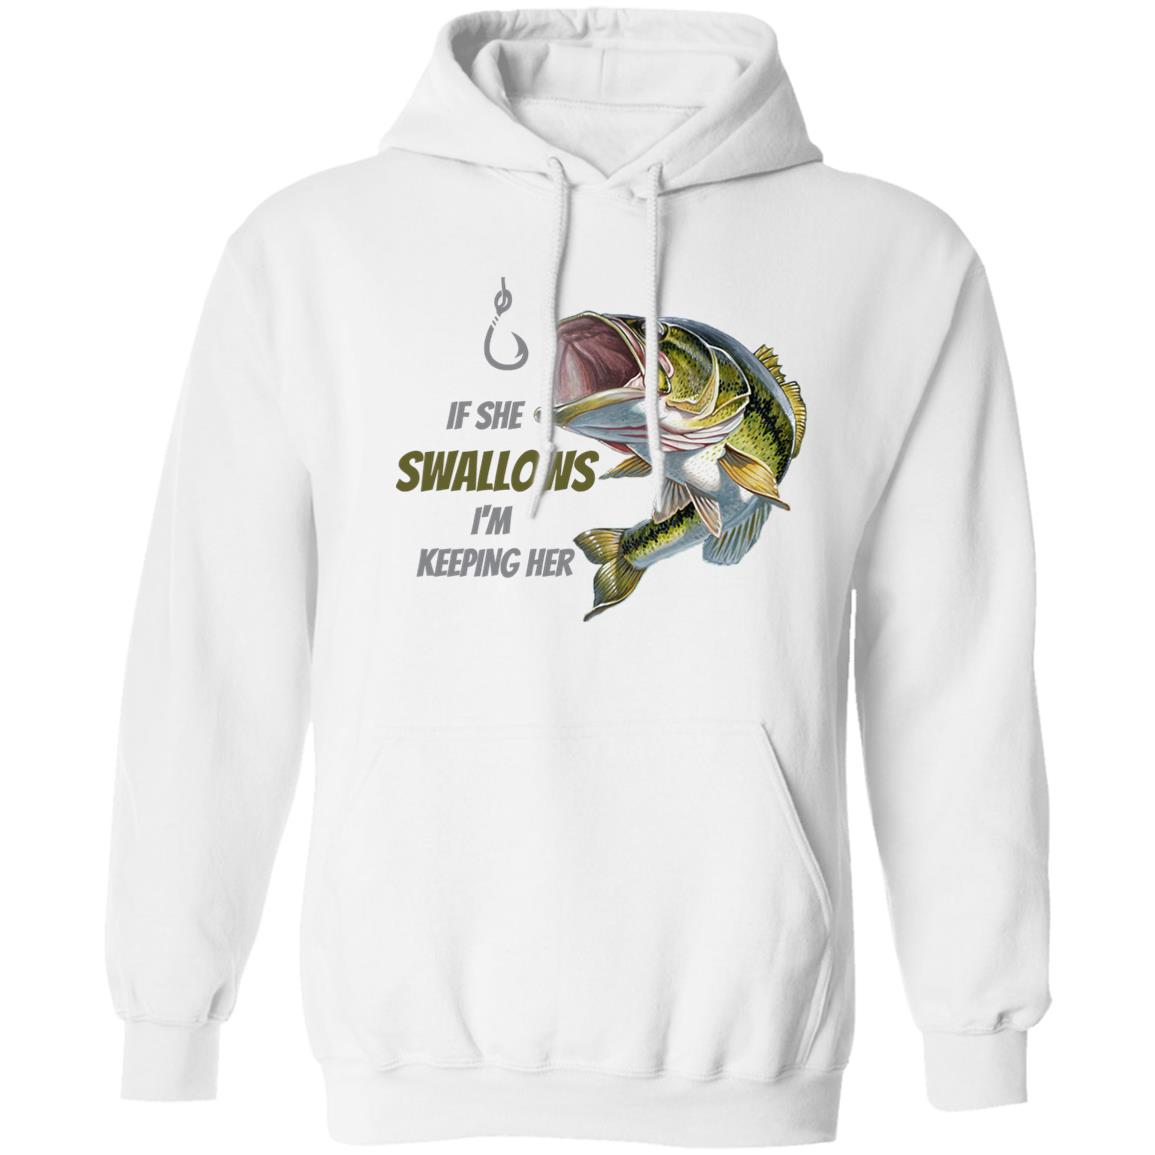 I'm Keeping Her -  (Green Fish) - Z66x Pullover Hoodie 8 oz (Closeout)